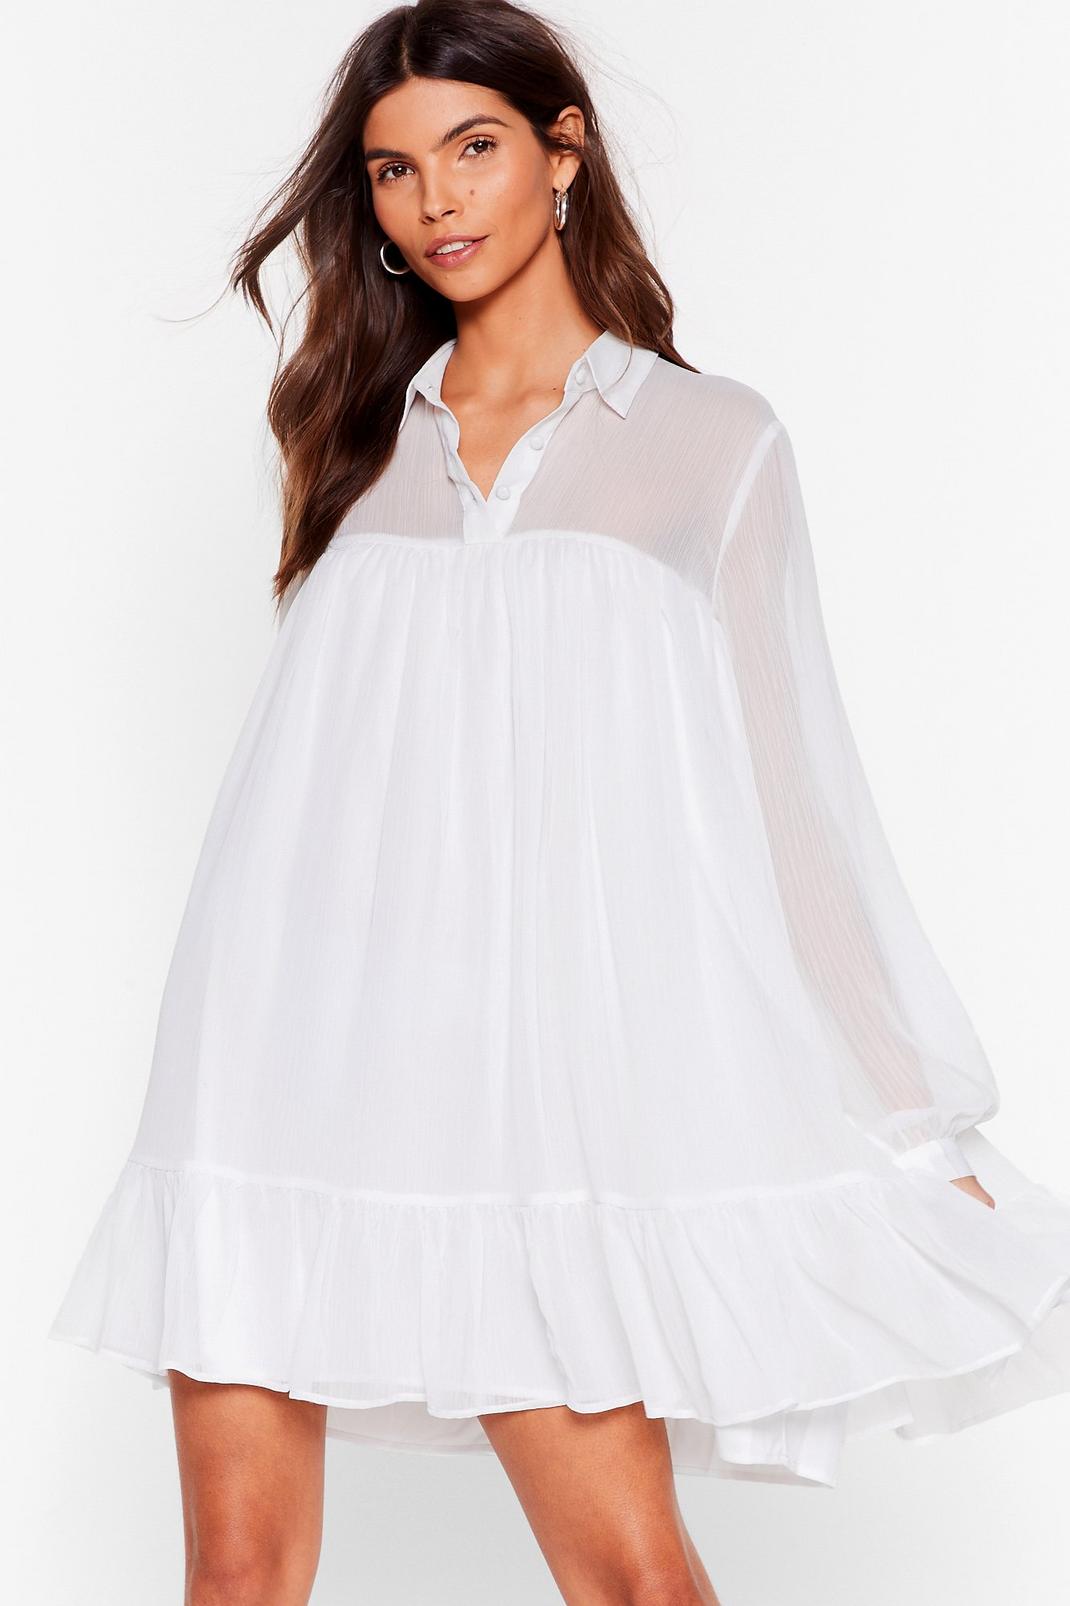 White Sheer and Now Chiffon Mini Dress image number 1